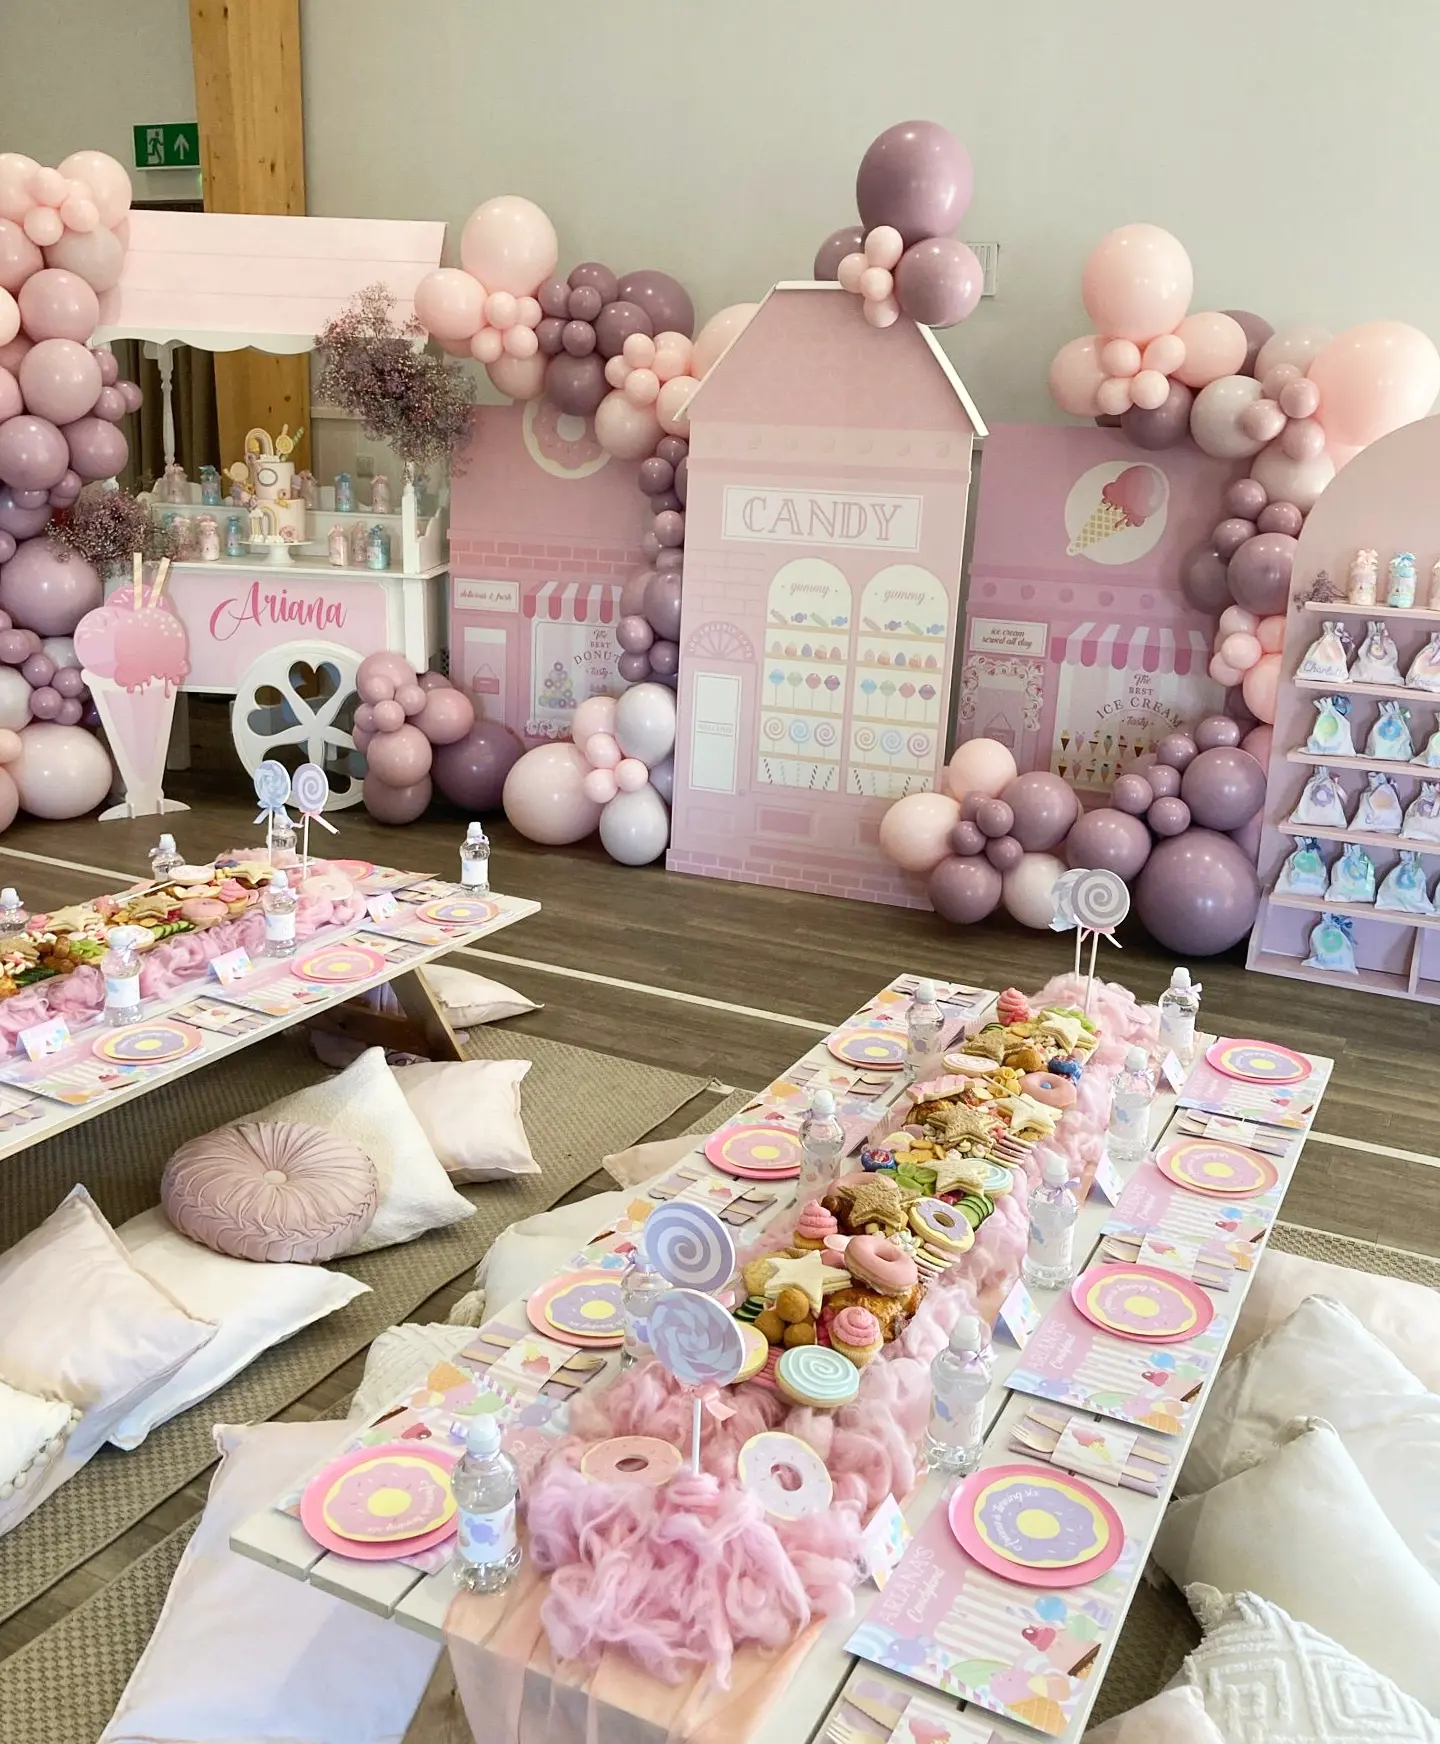 Candyland Themed Party - The Glitzy Balloon Company